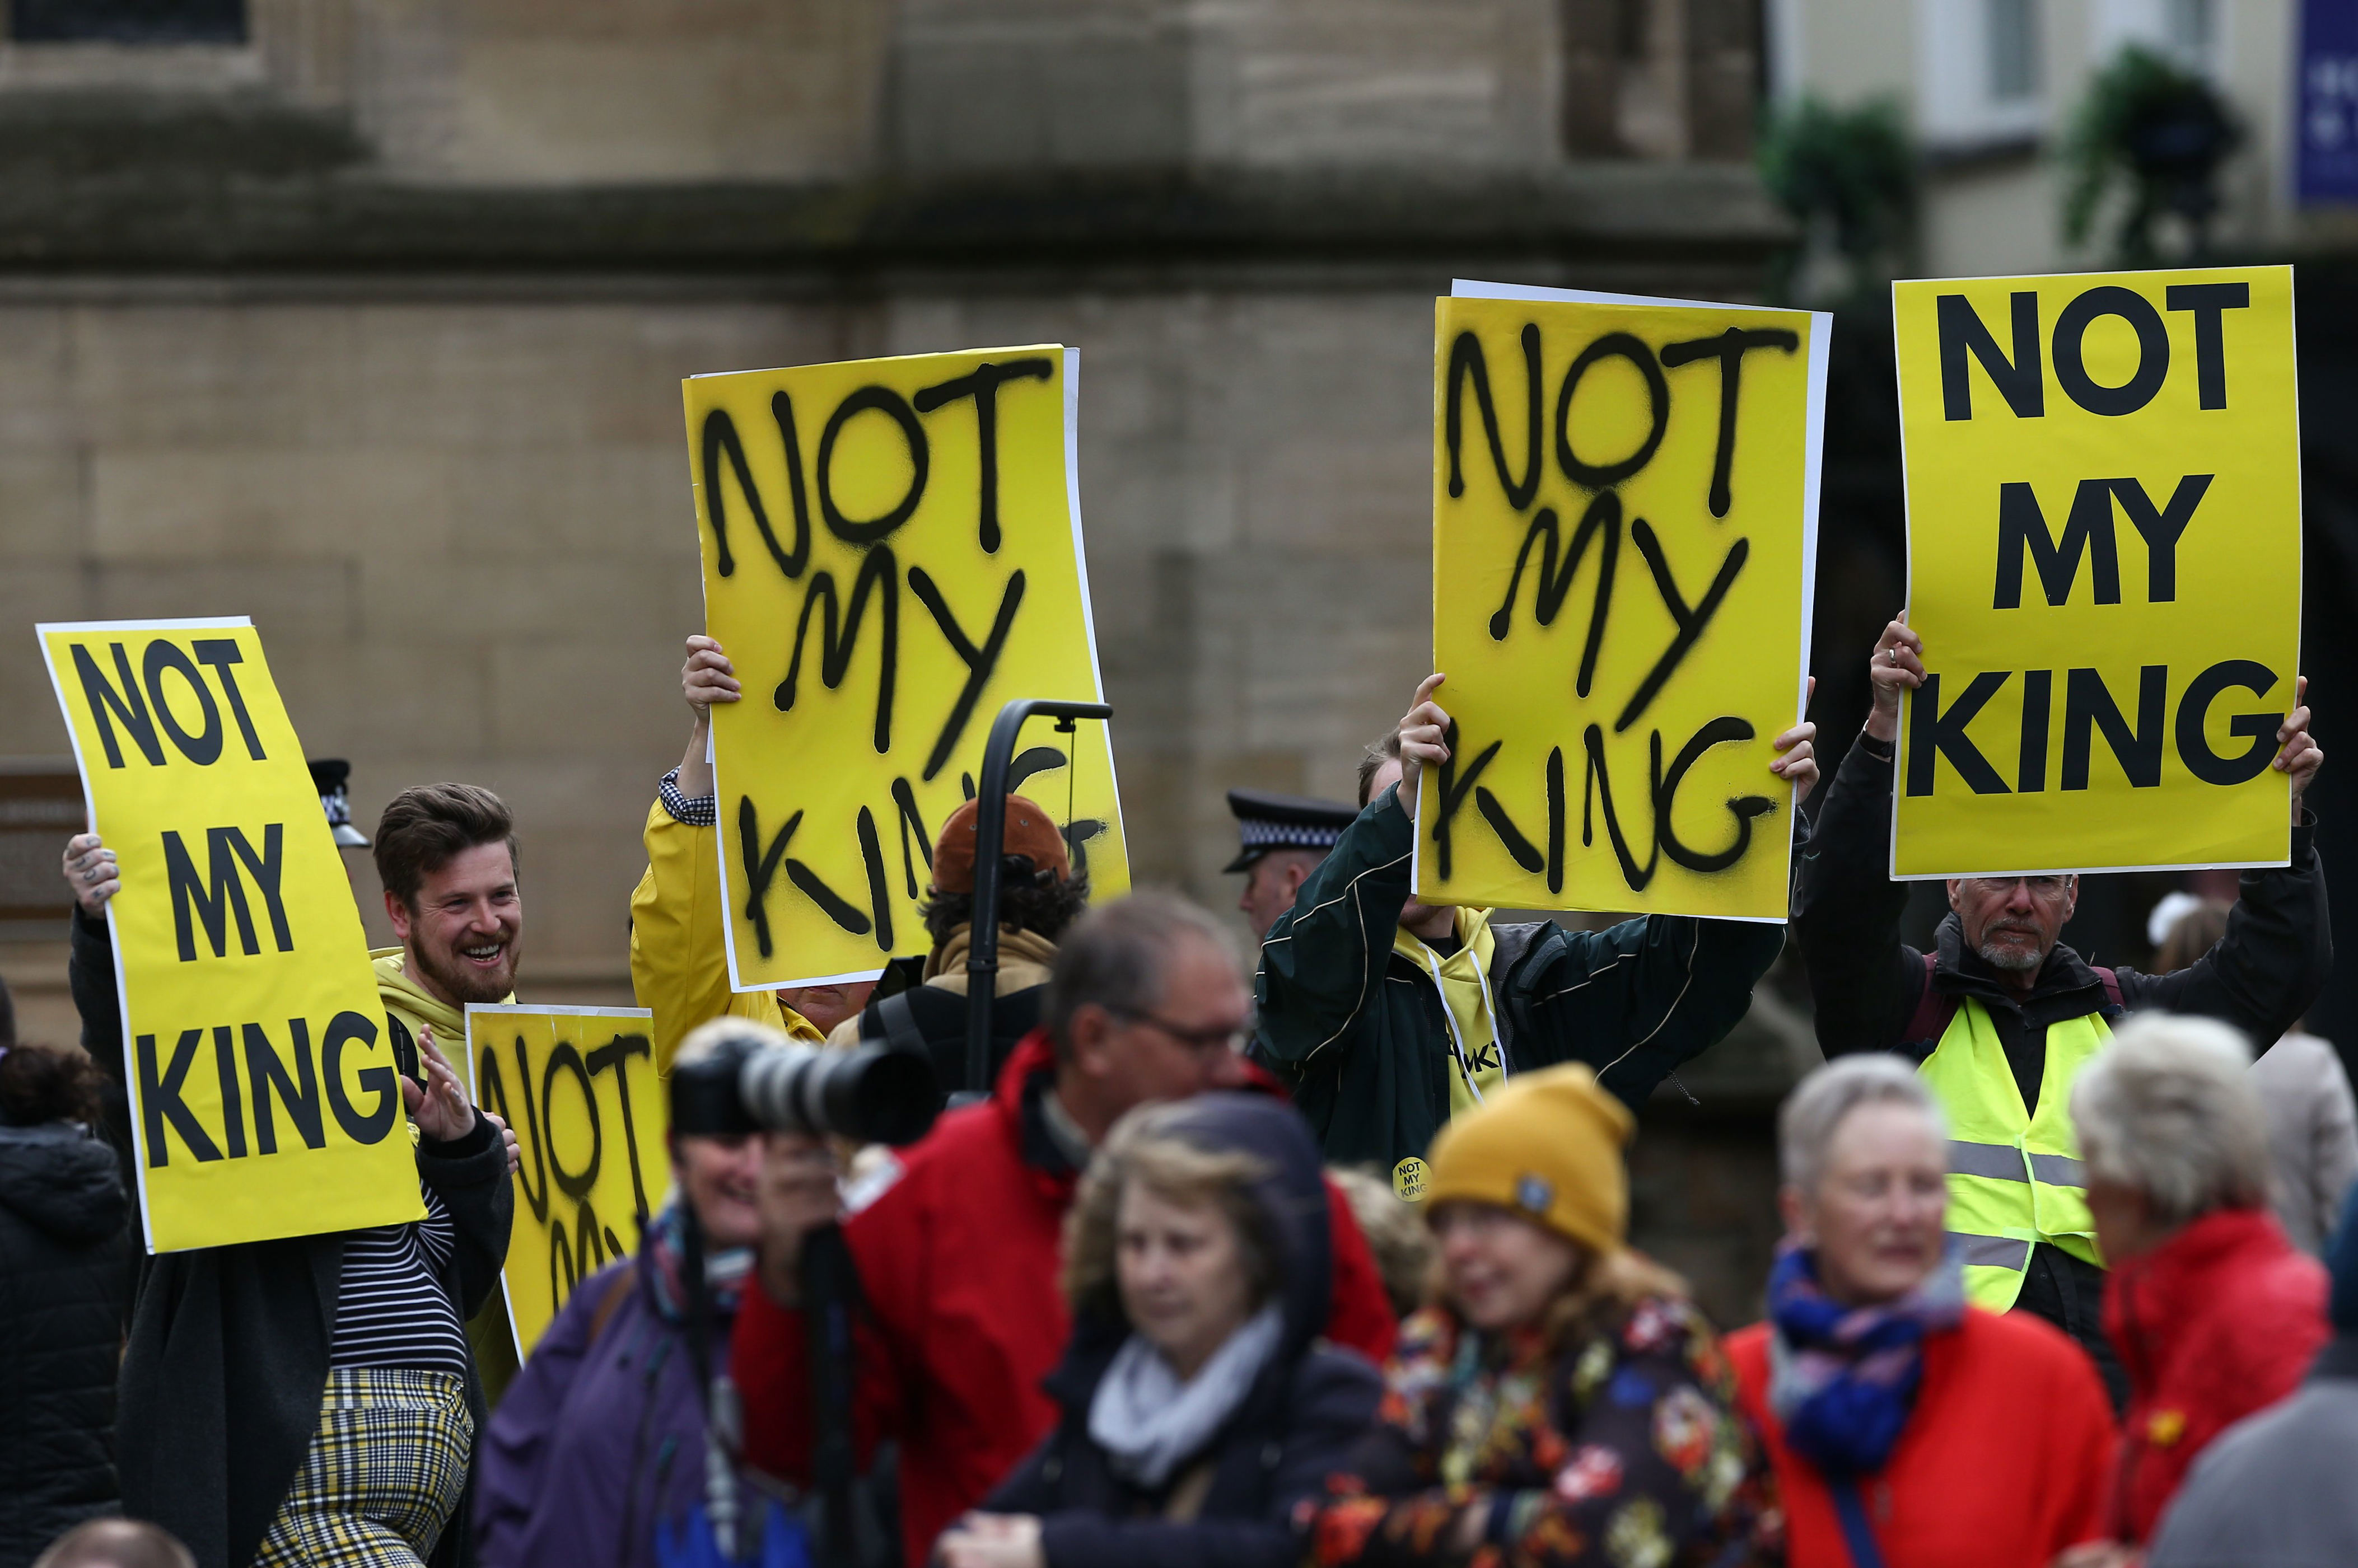 <p>Anti-monarchy protesters gathered outside York Minster, the second largest Gothic cathedral in Northern Europe, in York, England, on April 6, 2023, to greet King Charles and Queen Consort Camilla when they arrived for the Royal Maundy Service.</p>